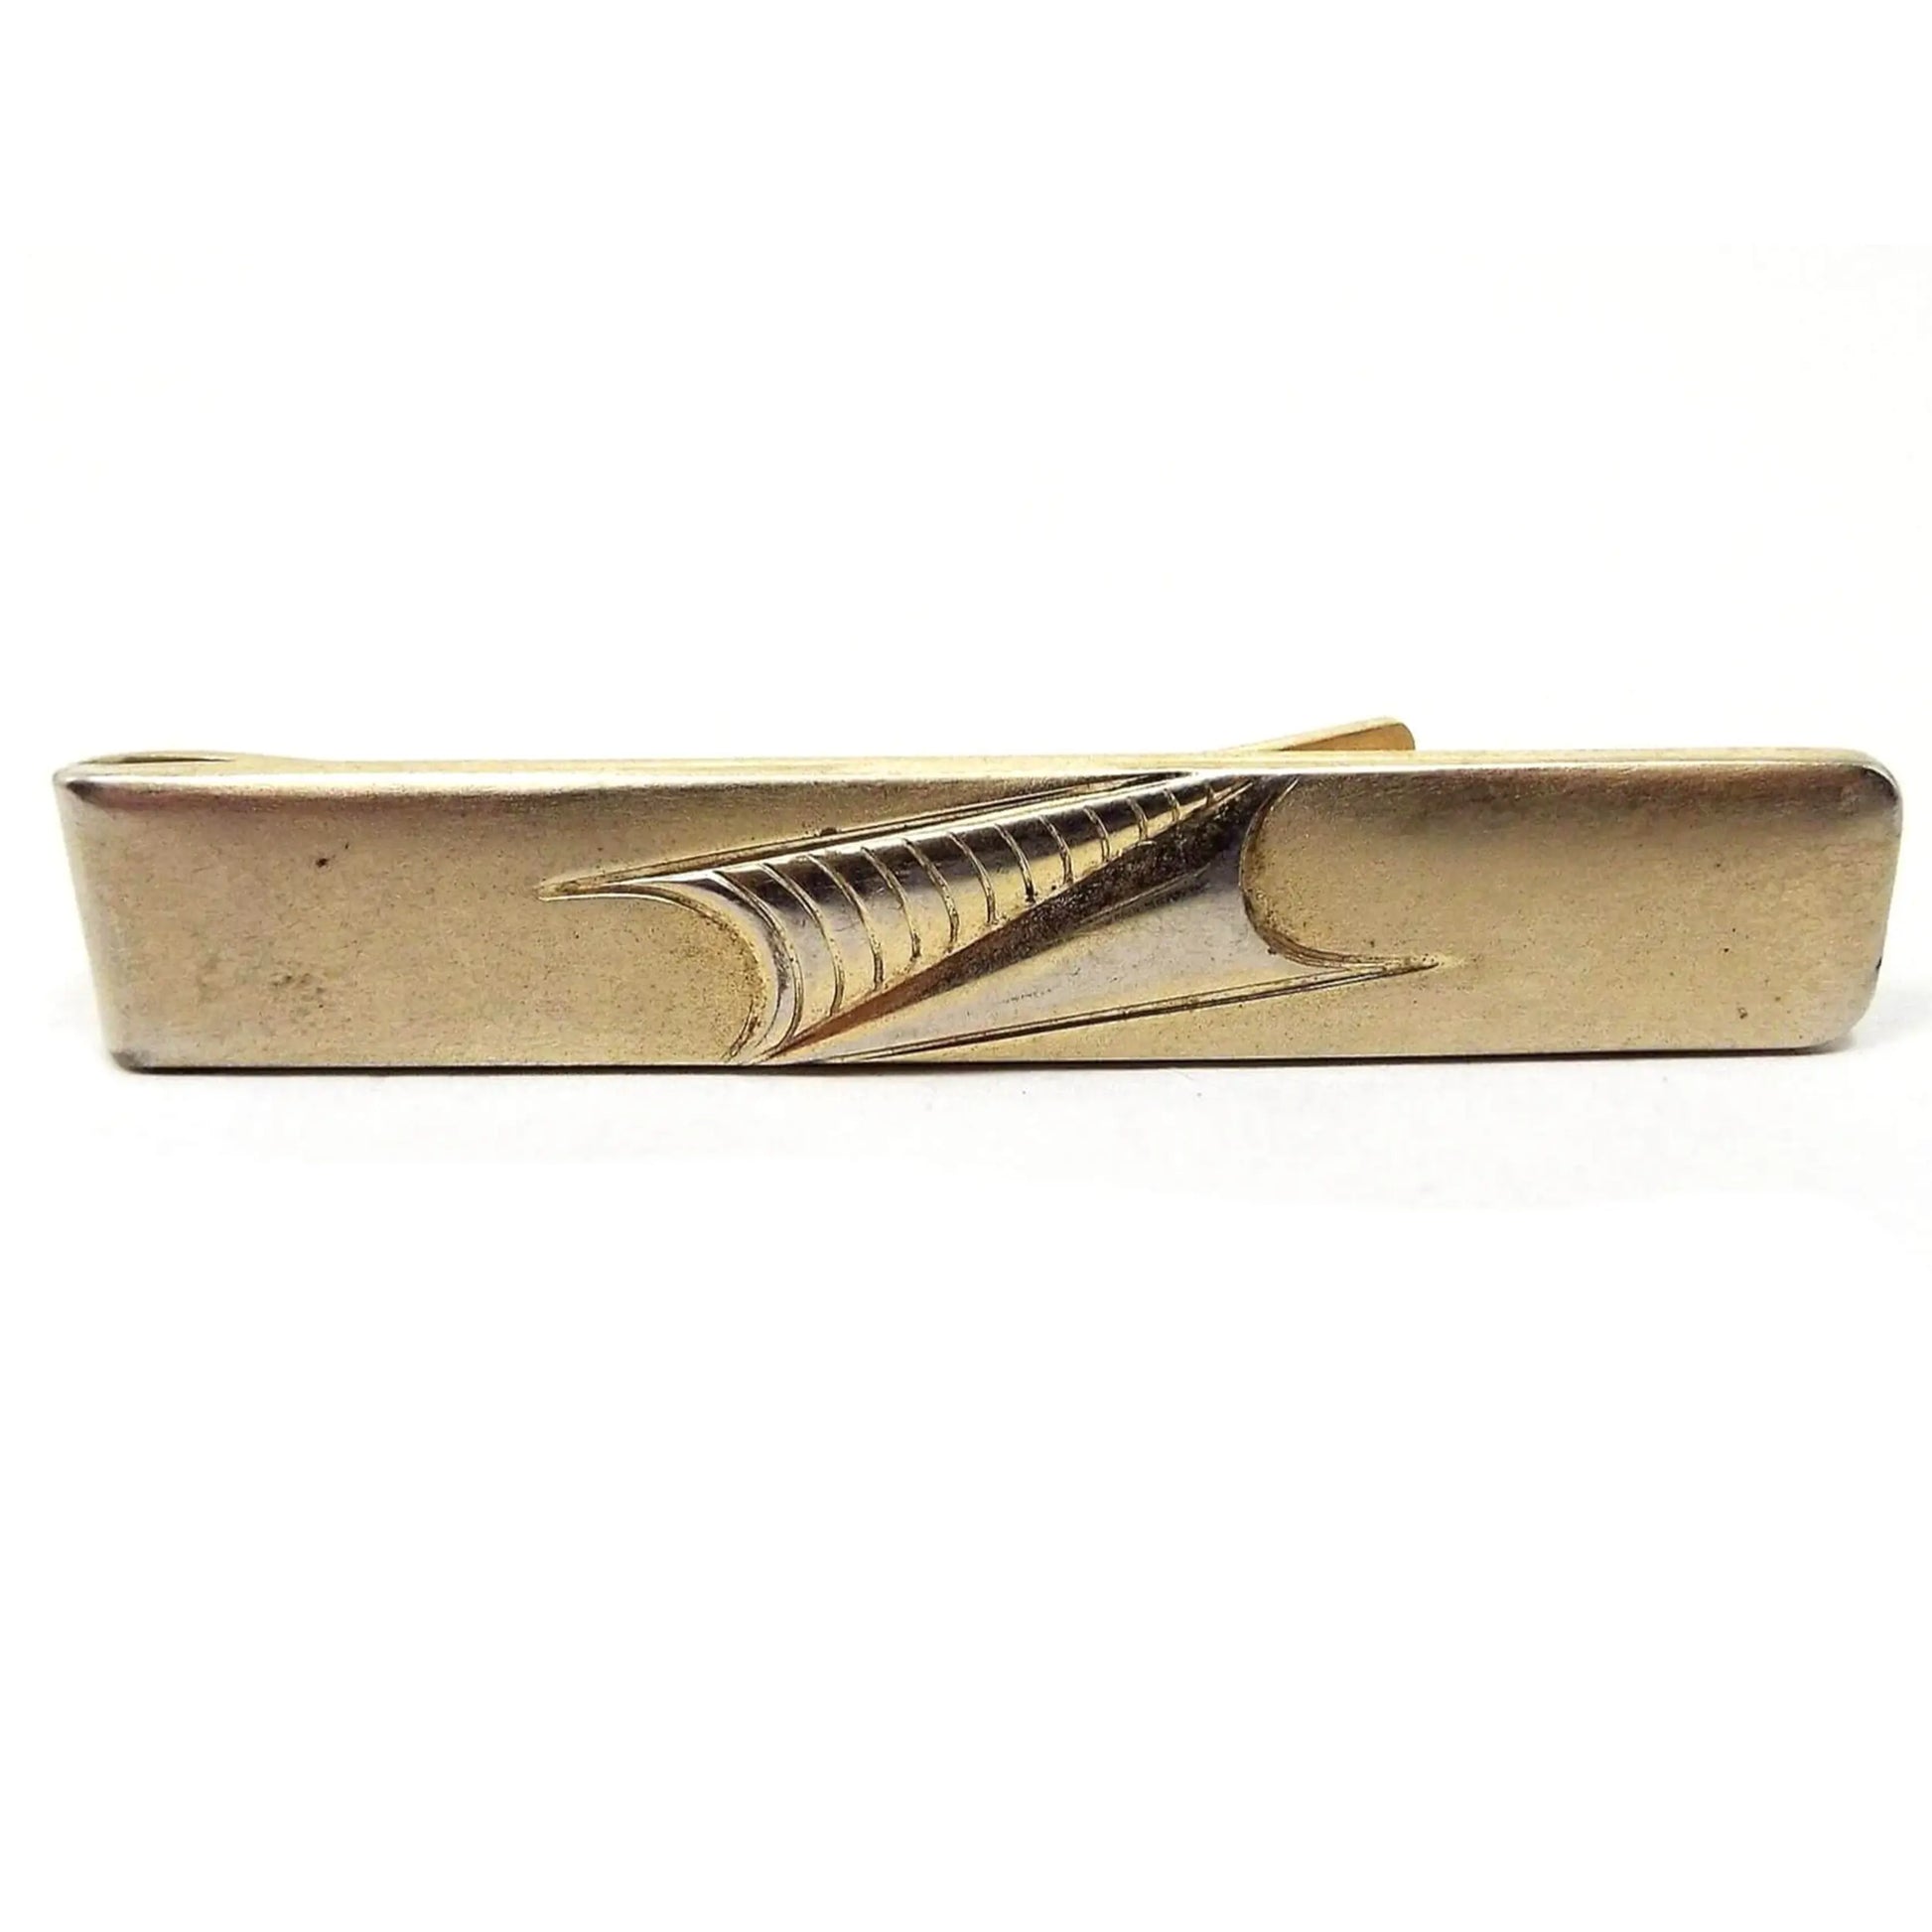 Front view of the 1950's Anson vintage tie bar. Metal is darkened gold in color. It is a long rectangle shape with two modernist style triangles side by side pointing towards each other in the middle. Each triangle has curved indented bottoms. One is plain and the other has curved lines on it. 